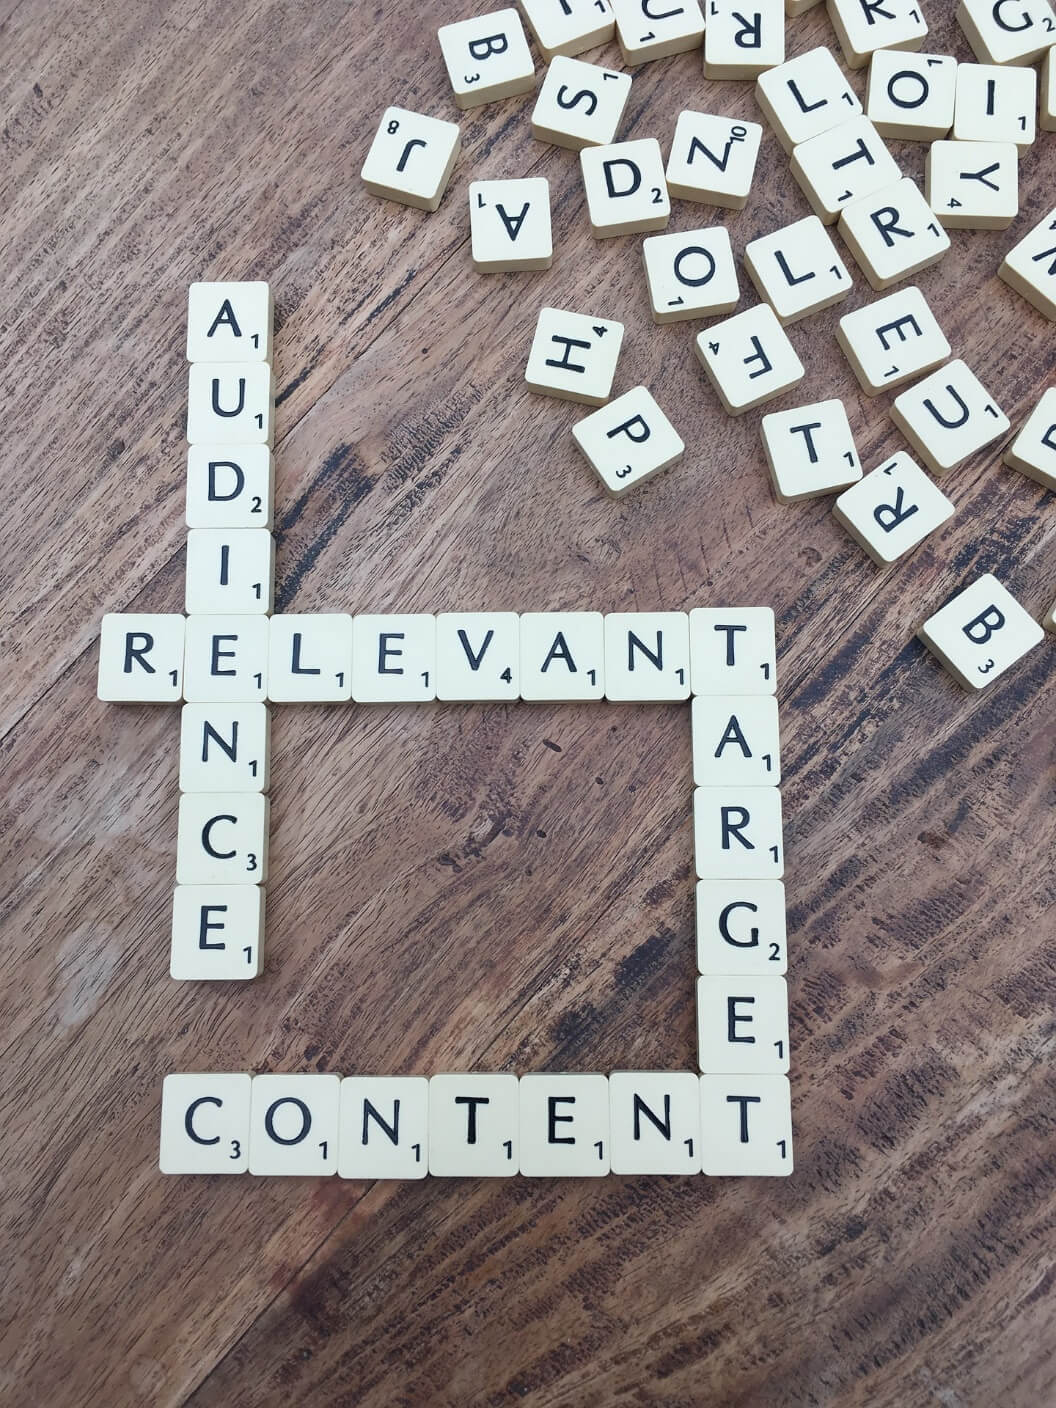 content marketing tips 2019